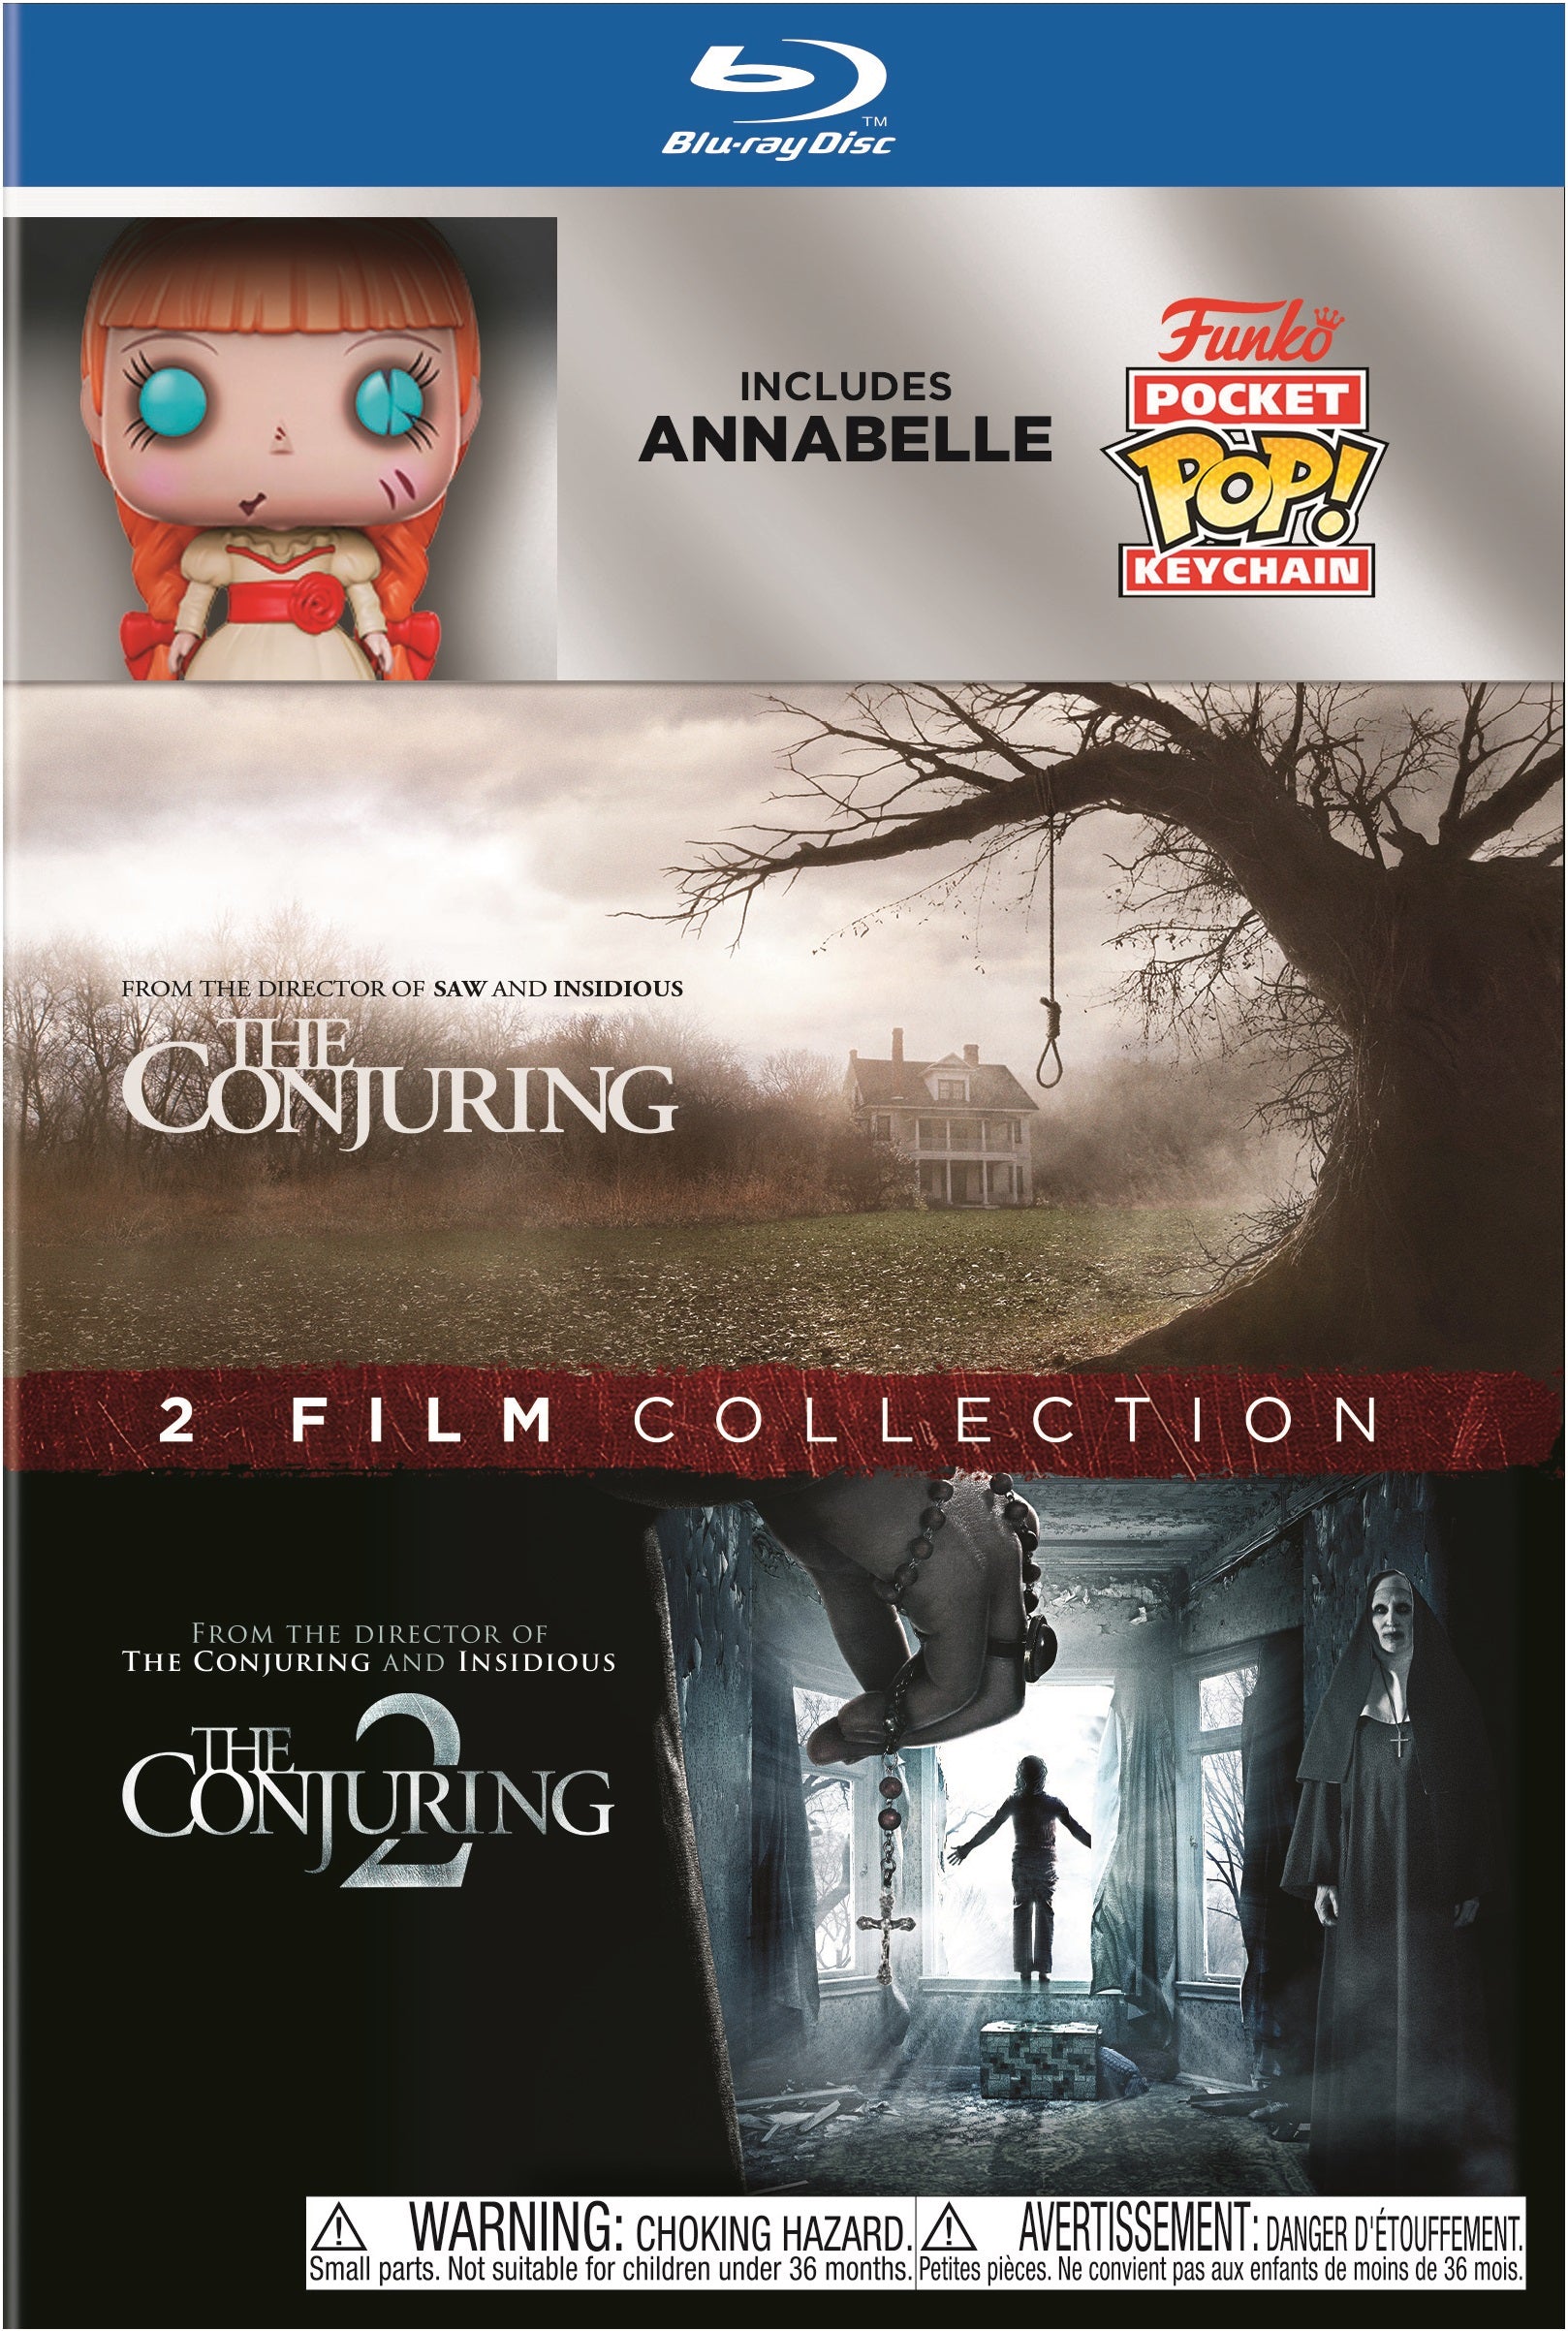 The Conjuring + Funko (2 film collection)